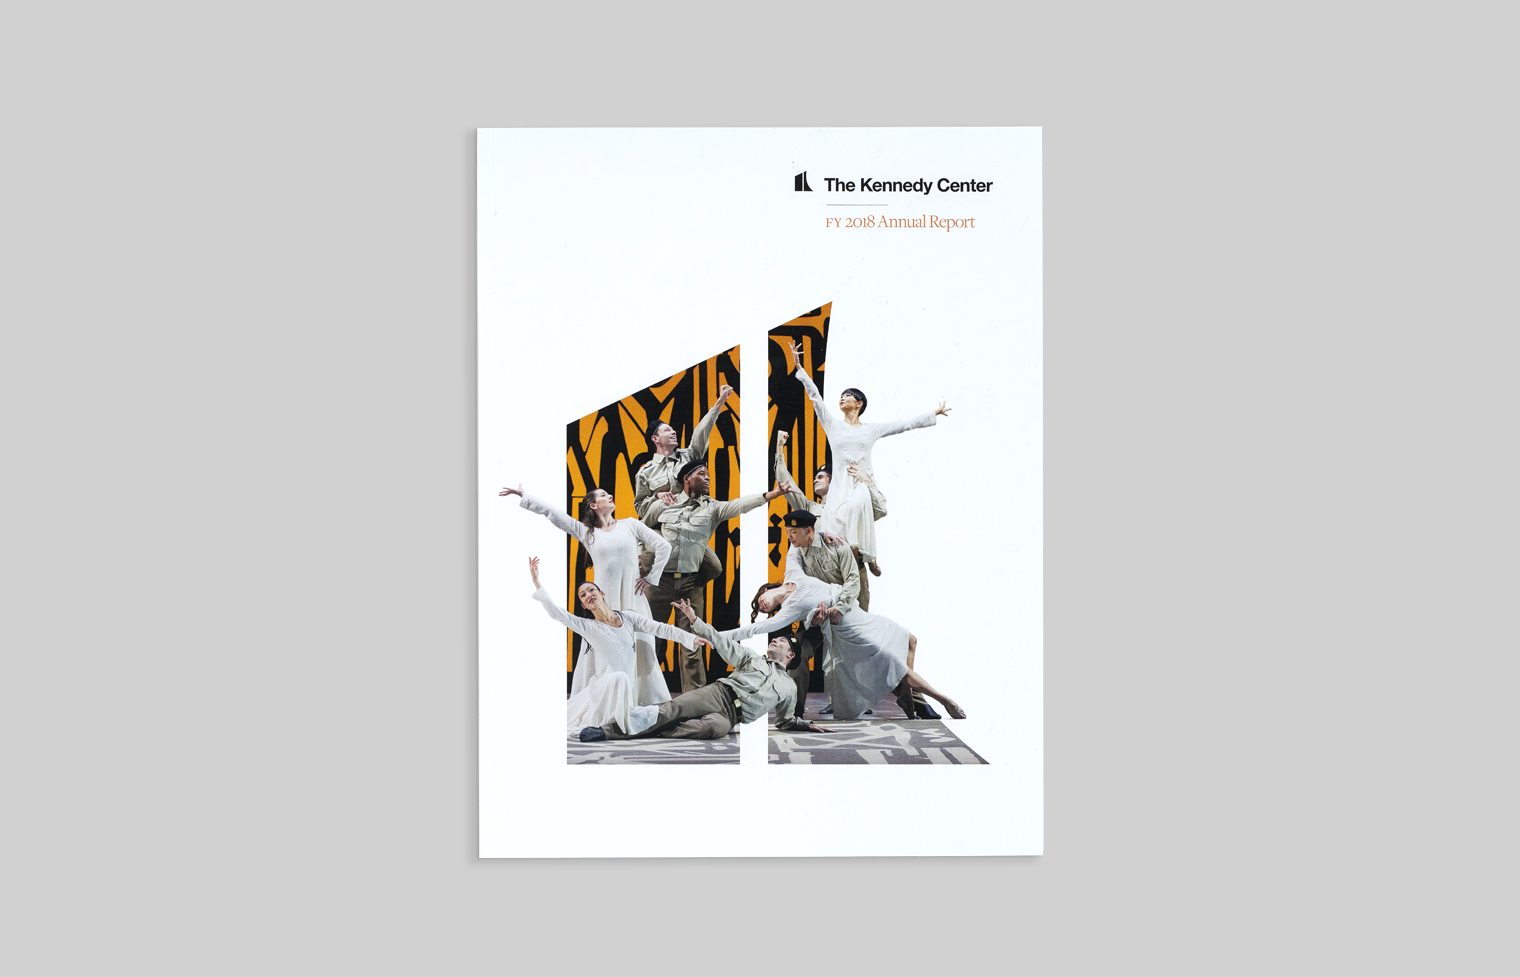 Cover of the 2017 annual report shows a dance performace with women in white dresses and men in military uniforms.